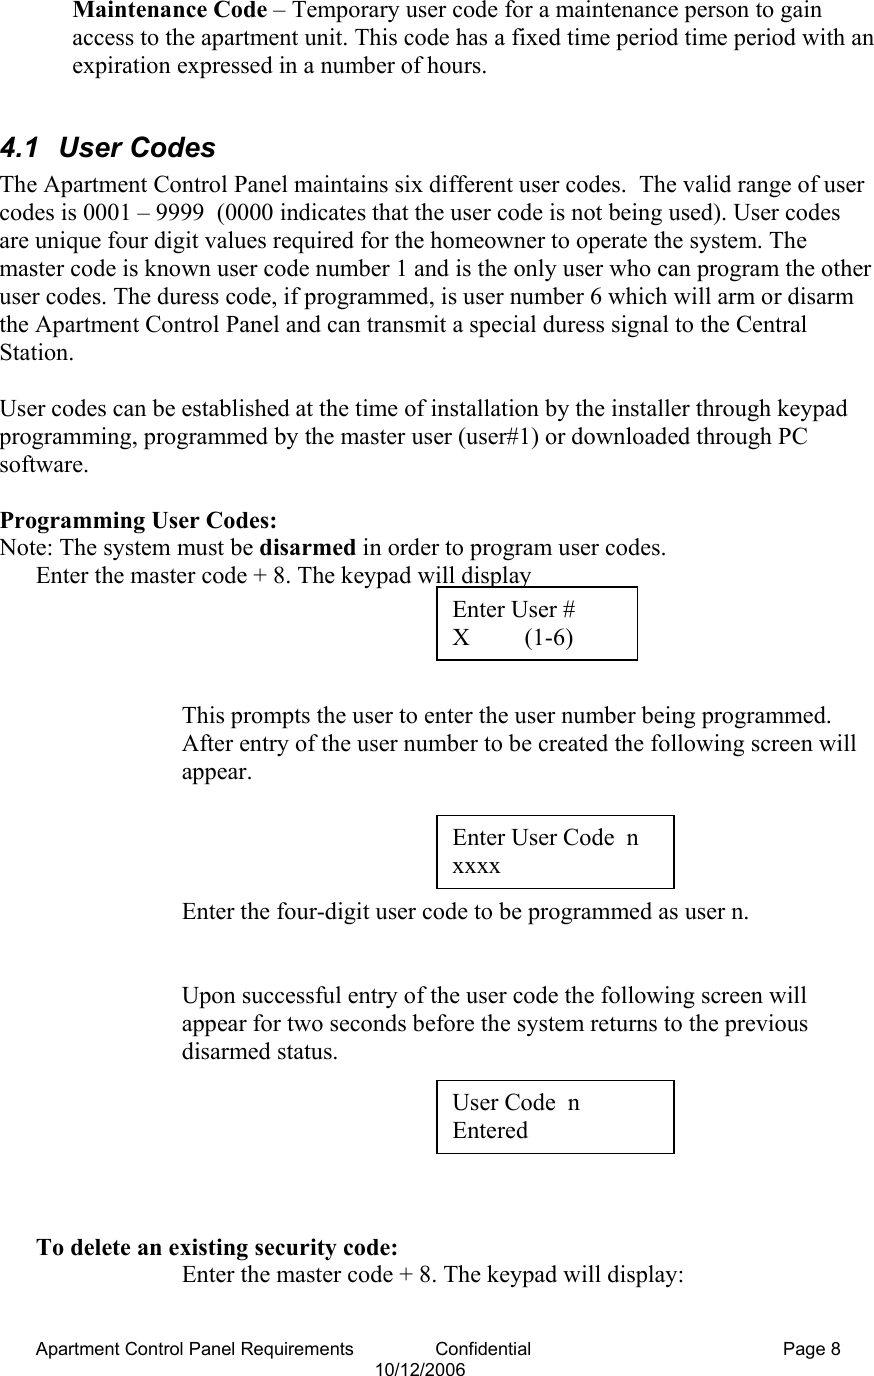 Apartment Control Panel Requirements                Confidential  Page 8 10/12/2006 Maintenance Code – Temporary user code for a maintenance person to gain access to the apartment unit. This code has a fixed time period time period with an expiration expressed in a number of hours.  4.1 User Codes The Apartment Control Panel maintains six different user codes.  The valid range of user codes is 0001 – 9999  (0000 indicates that the user code is not being used). User codes are unique four digit values required for the homeowner to operate the system. The master code is known user code number 1 and is the only user who can program the other user codes. The duress code, if programmed, is user number 6 which will arm or disarm the Apartment Control Panel and can transmit a special duress signal to the Central Station.  User codes can be established at the time of installation by the installer through keypad programming, programmed by the master user (user#1) or downloaded through PC software.  Programming User Codes: Note: The system must be disarmed in order to program user codes. Enter the master code + 8. The keypad will display      This prompts the user to enter the user number being programmed.  After entry of the user number to be created the following screen will appear.     Enter the four-digit user code to be programmed as user n.   Upon successful entry of the user code the following screen will appear for two seconds before the system returns to the previous disarmed status.      To delete an existing security code: Enter the master code + 8. The keypad will display:  Enter User #  X         (1-6) Enter User Code  n xxxx User Code  n Entered 